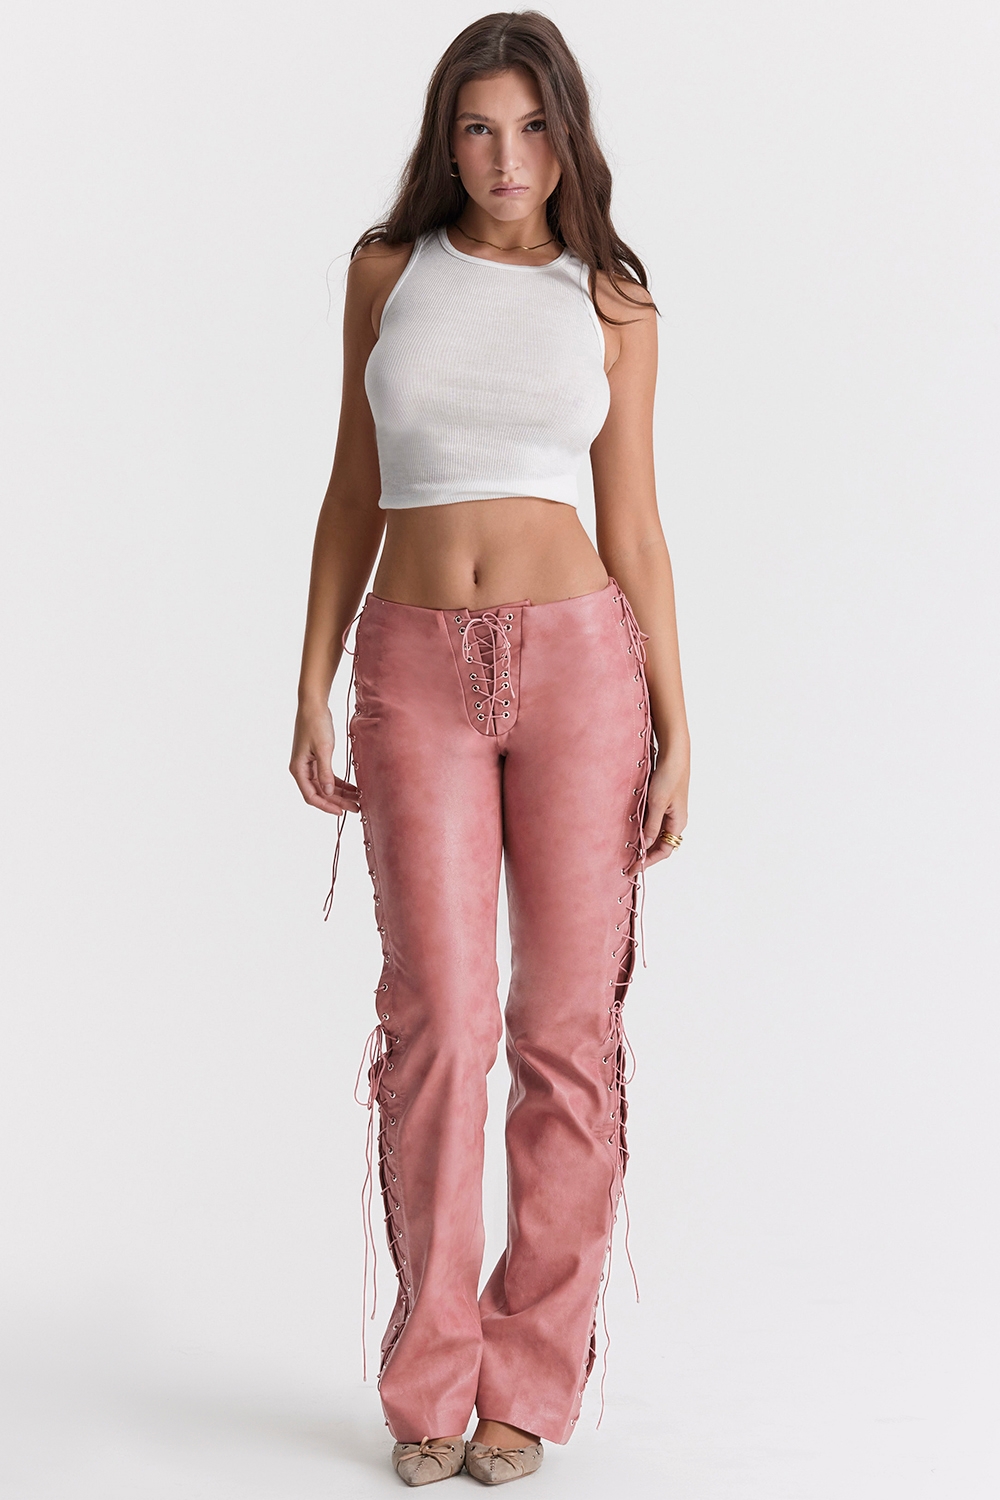 Drew, Warm Pink Vegan Leather Lace Up Trousers - SALE